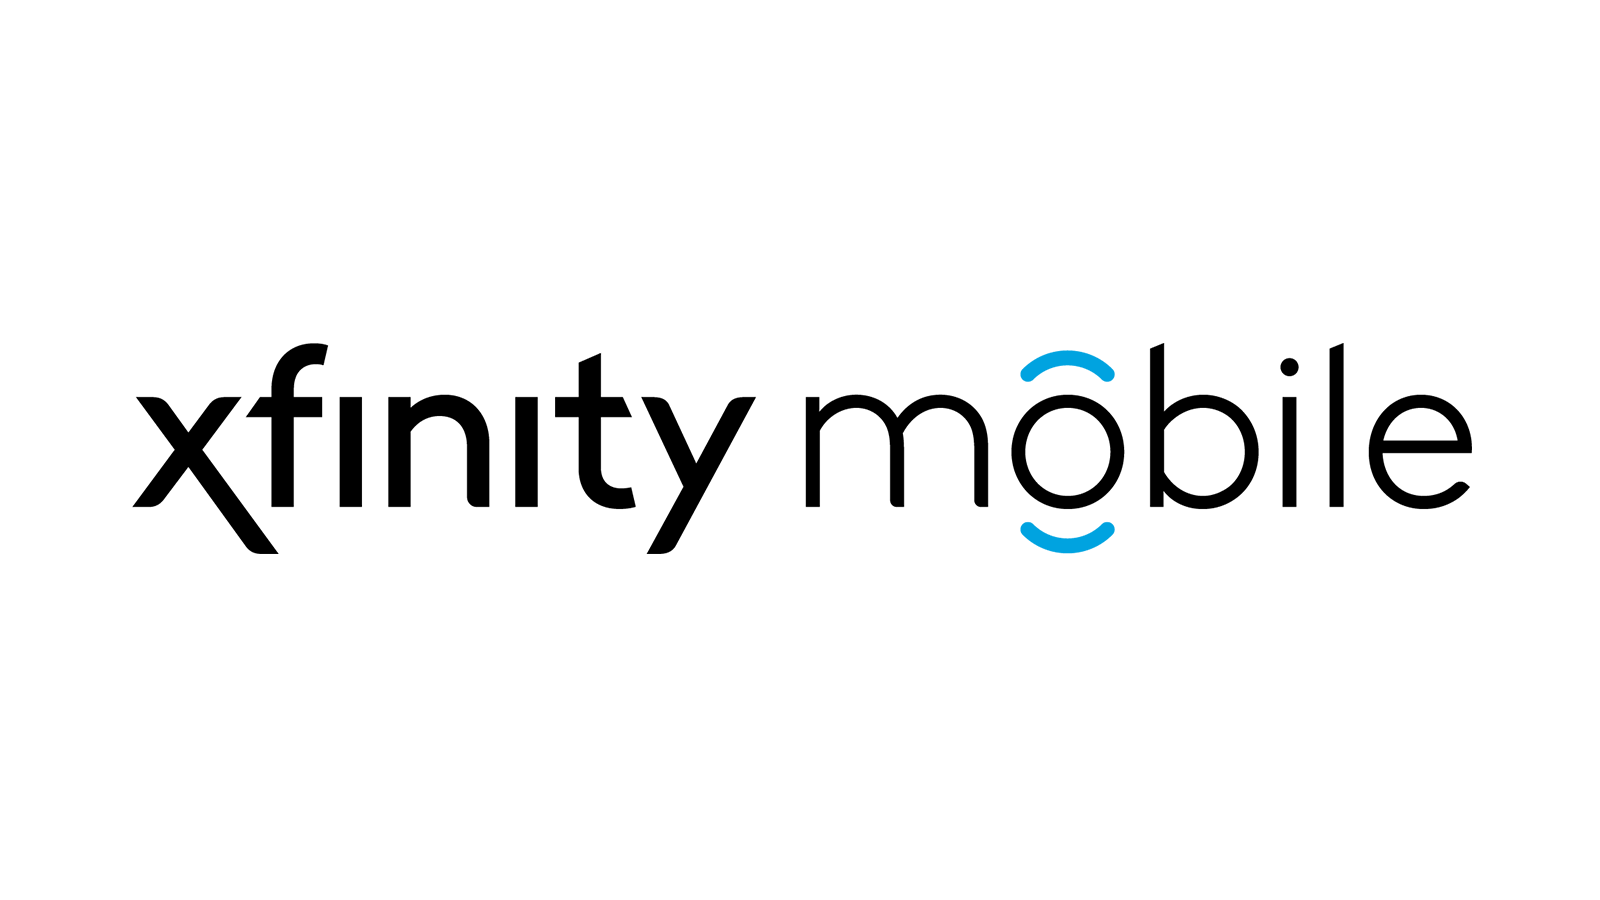 xfinity mobile - Rewards member earn $100 for adding a line - up to 5 lines